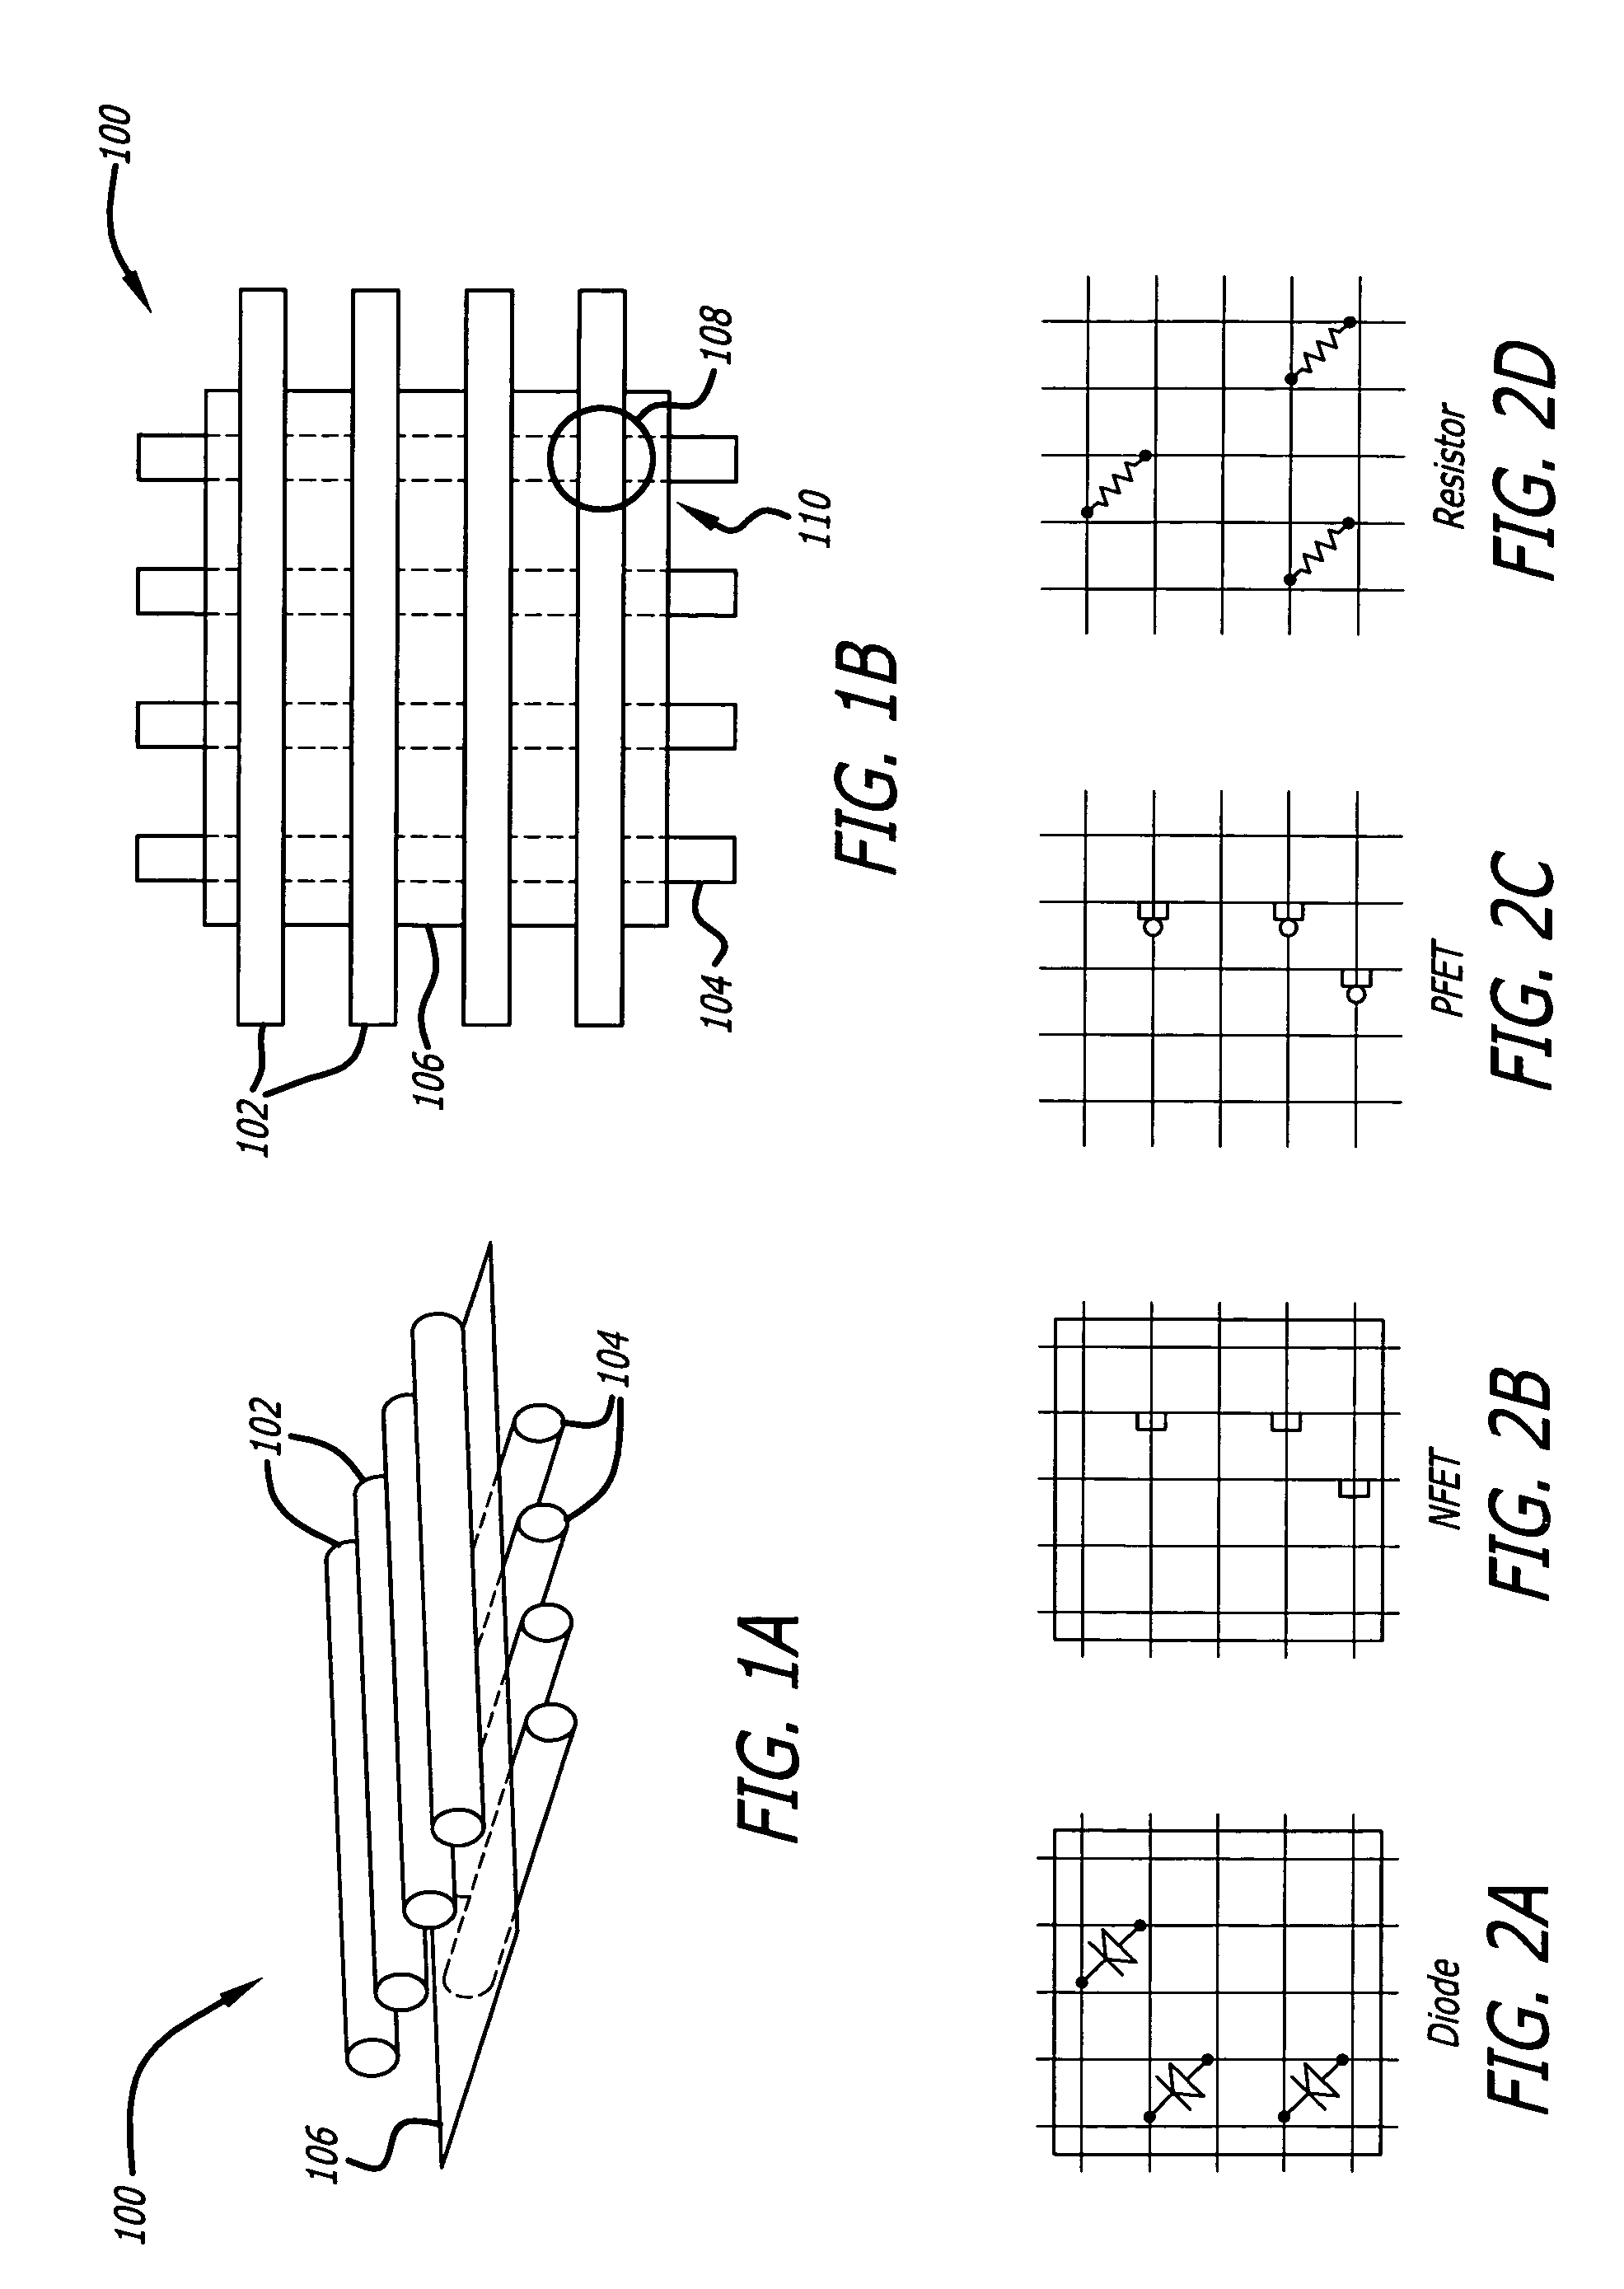 Architecture and methods for computing with reconfigurable resistor crossbars